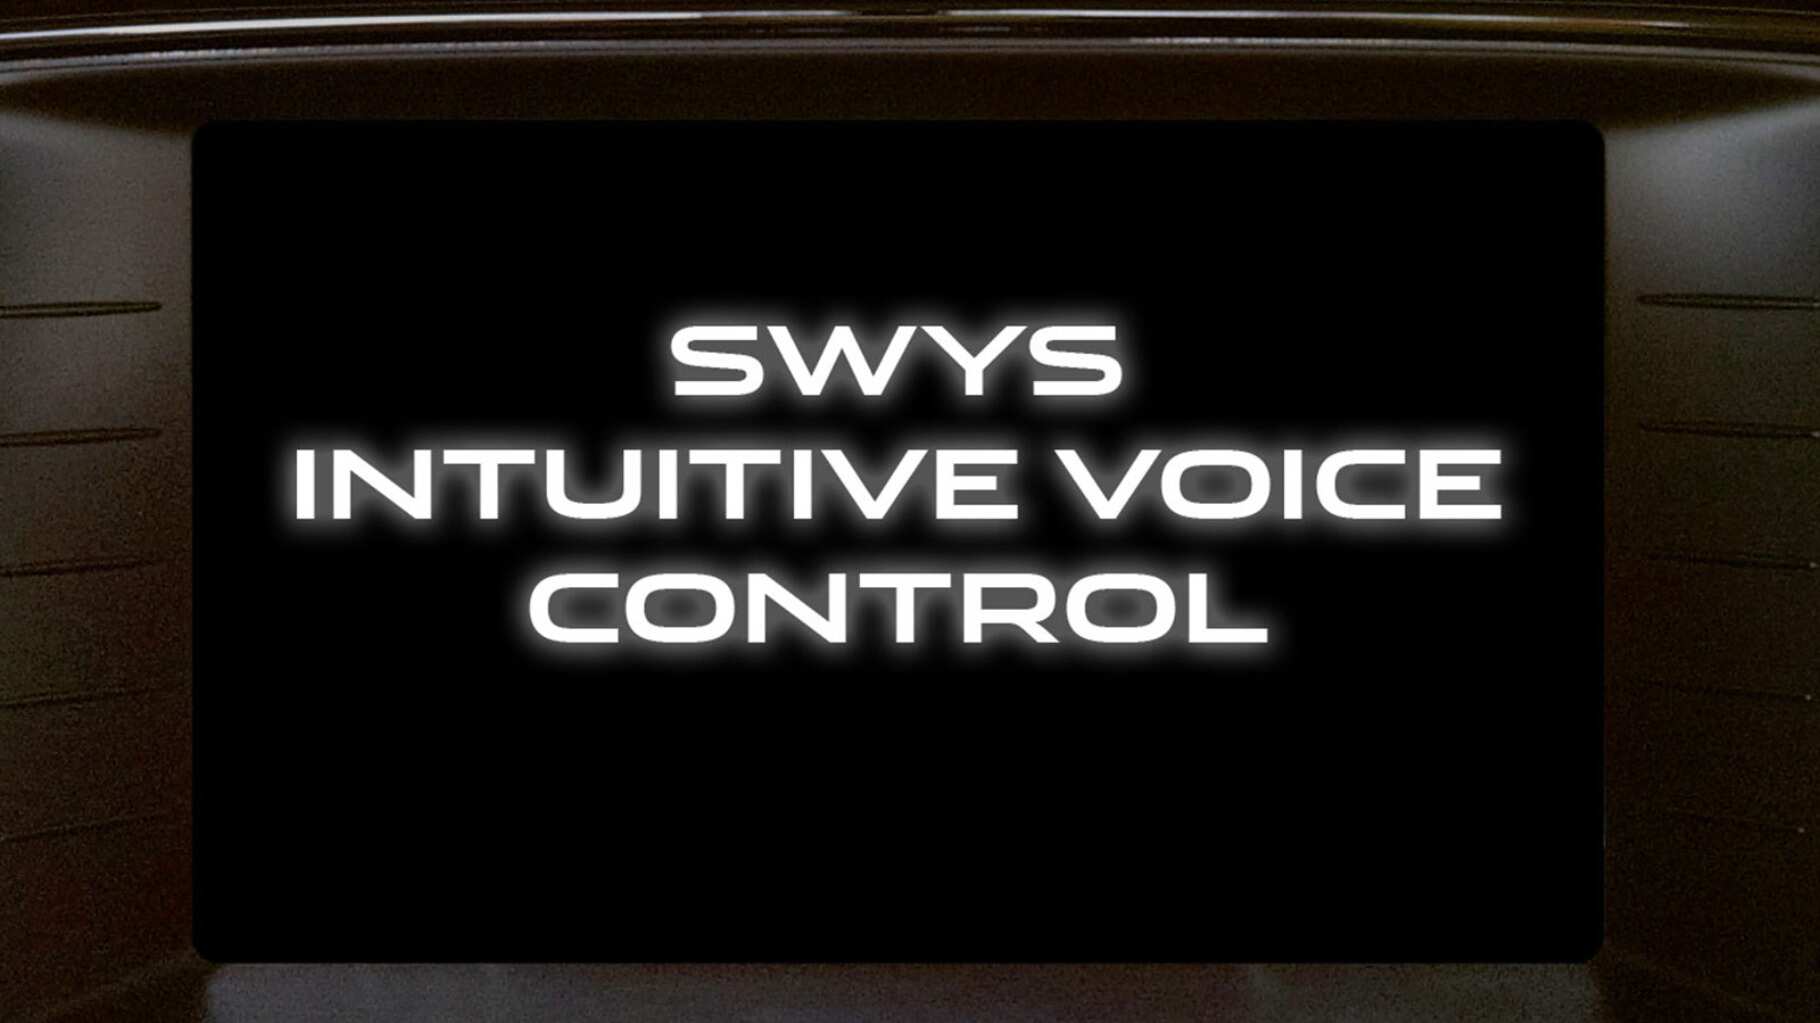 IMG_WRAPPER_gallery_SWYS_Intuitive_Voice_Control_Device-Desktop_1600x900.jpg